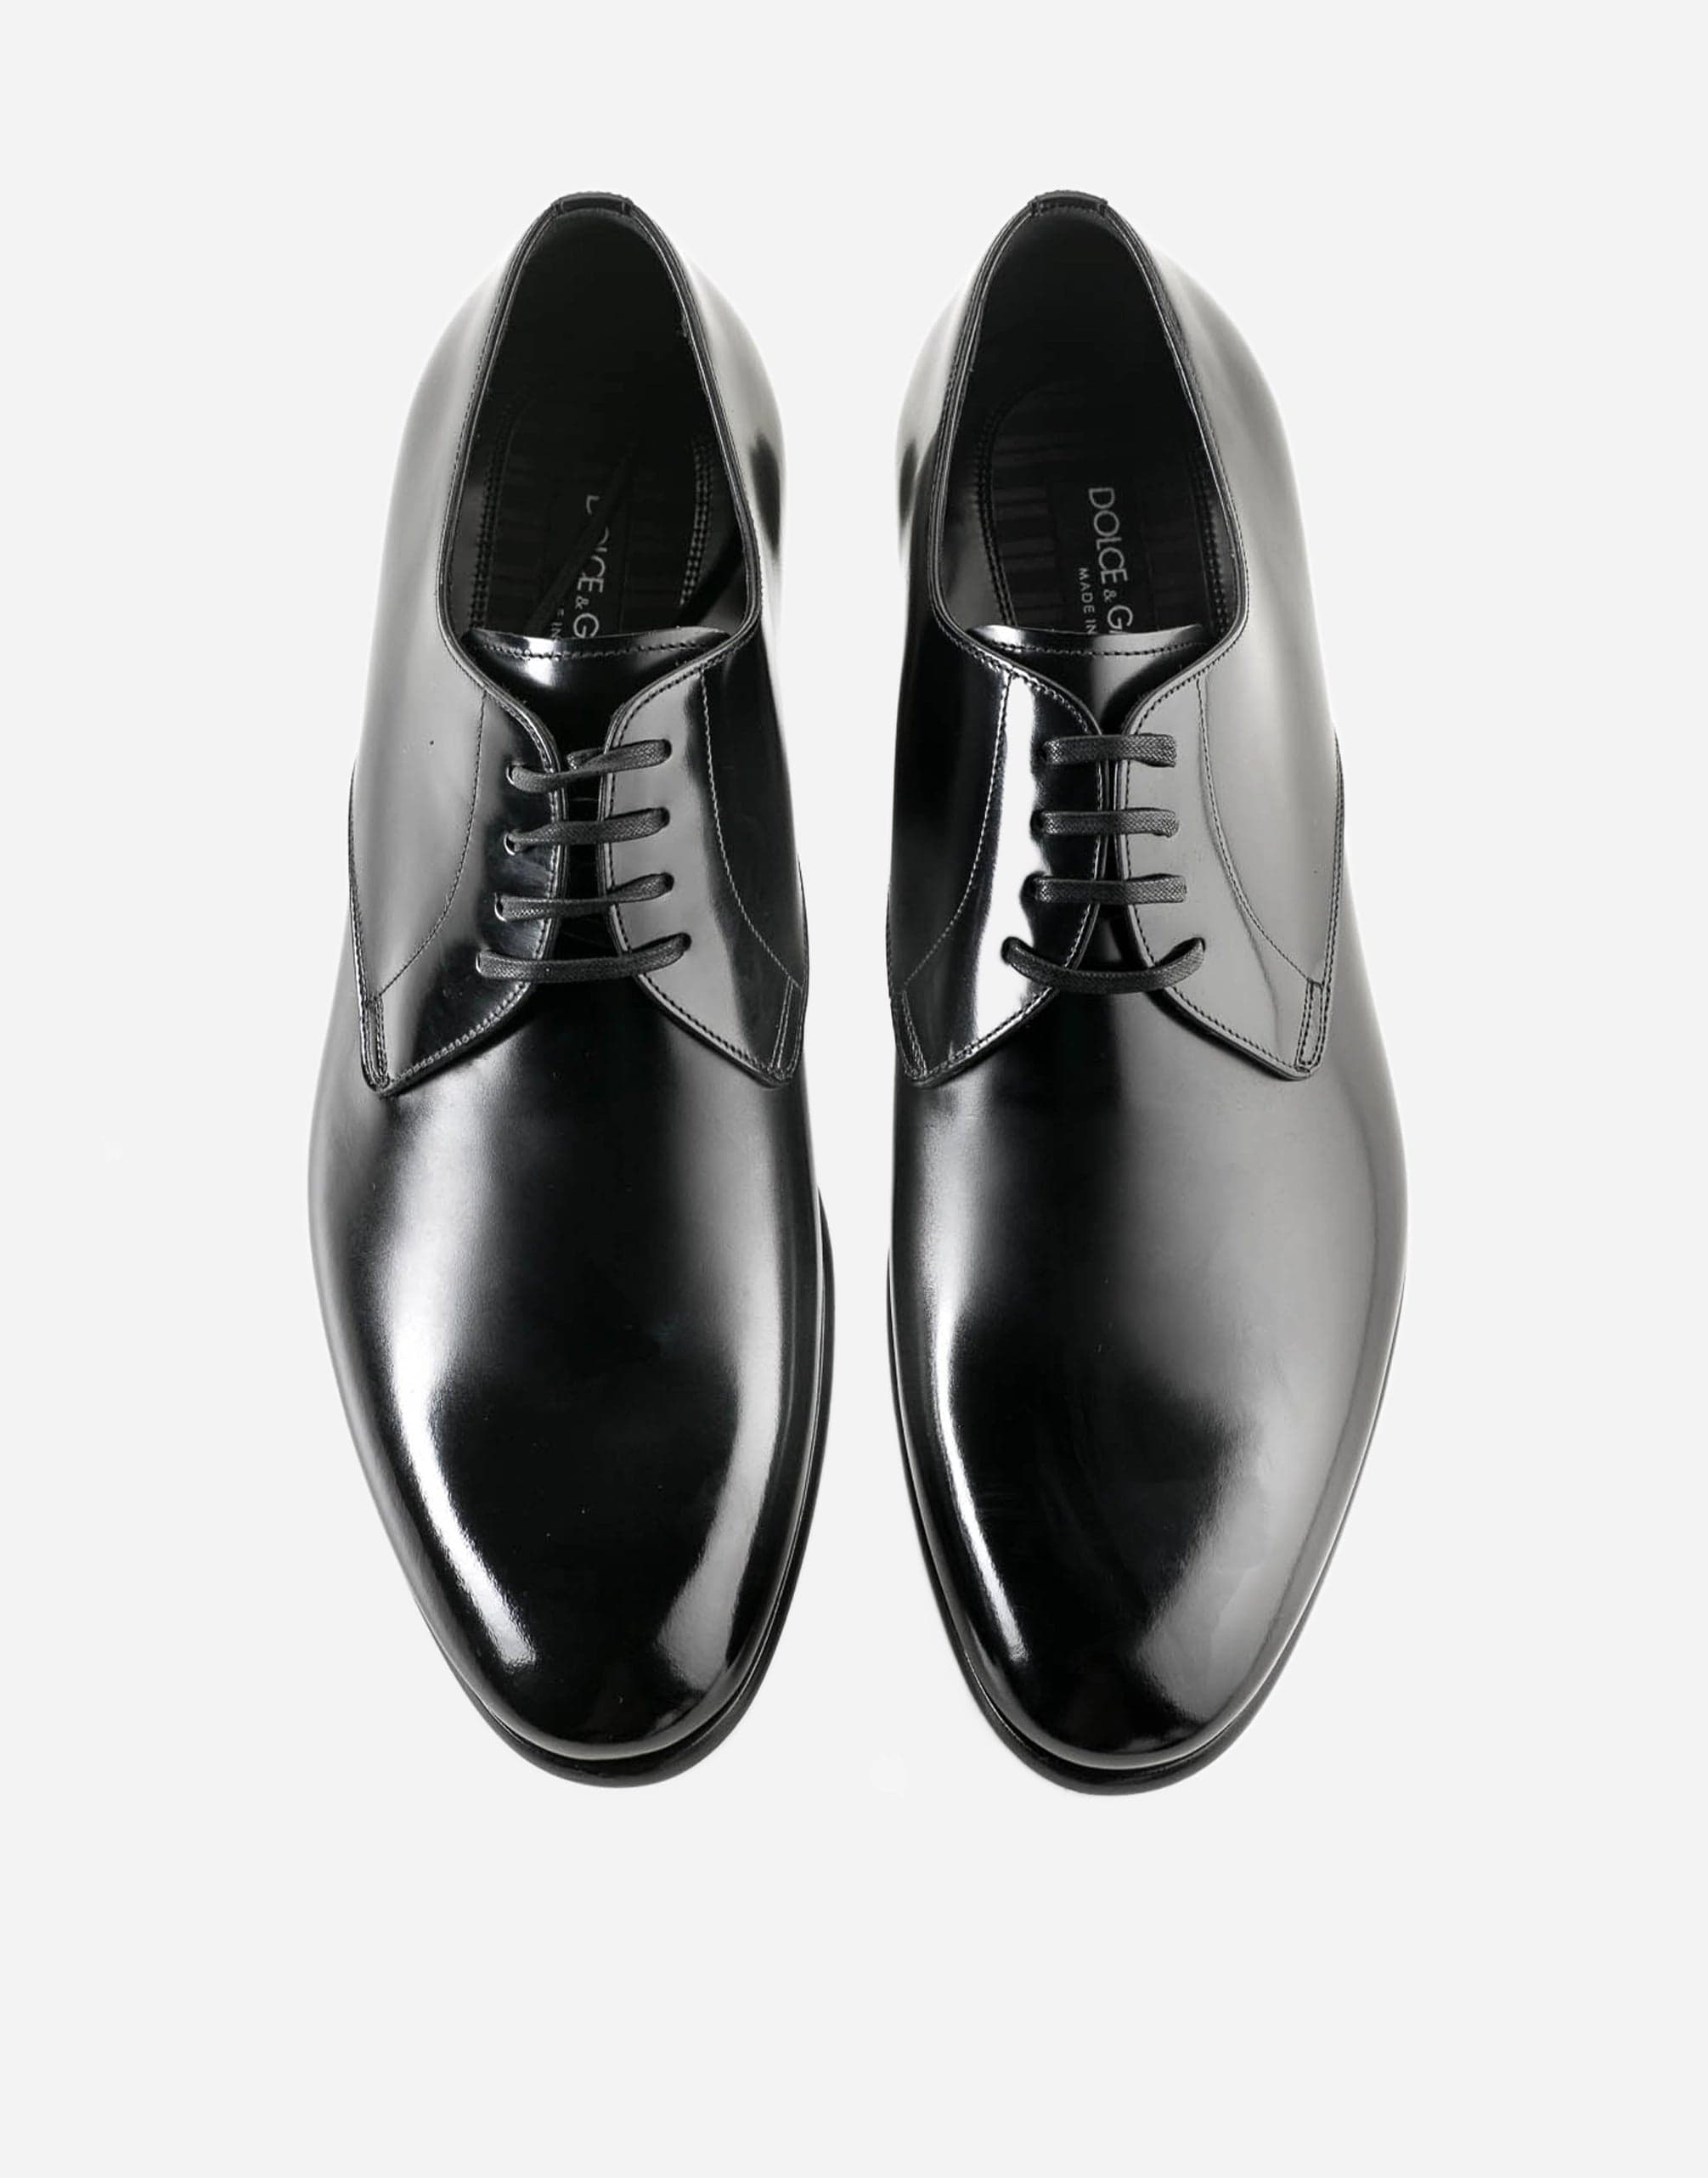 Dolce & Gabbana Formal Derby Shoes In Calfskin Leather